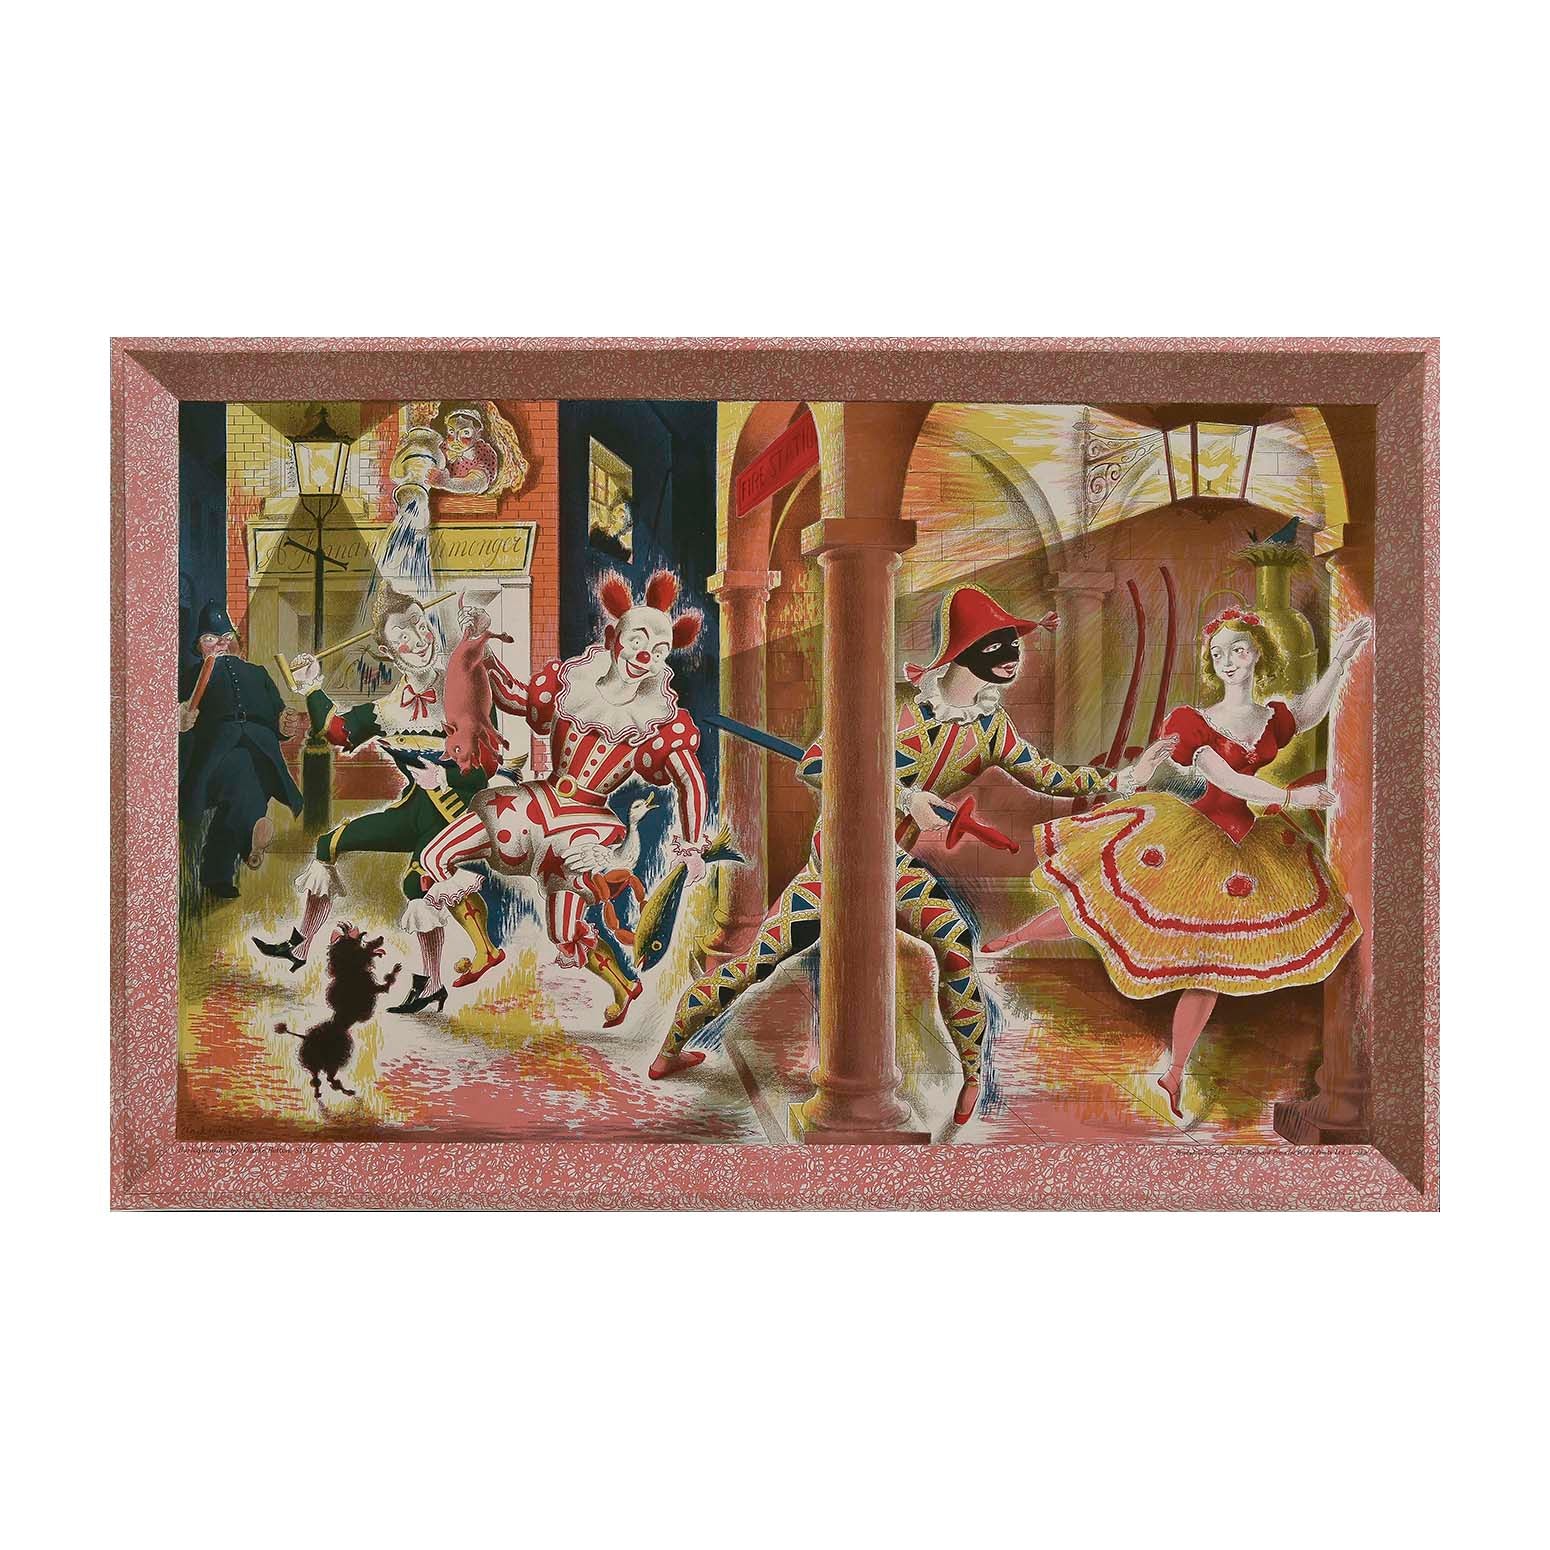 Original ‘School Print’, Harlequinade, by Clarke Hutton and published by School Prints Ltd, 1946. The design depicts a stage set with dancers in bright costume, including a harlequin, clown, ballet dancer and policeman. A woman in a pink spotted blouse empties water from a jug out of the upstairs window of a fishmonger's shop